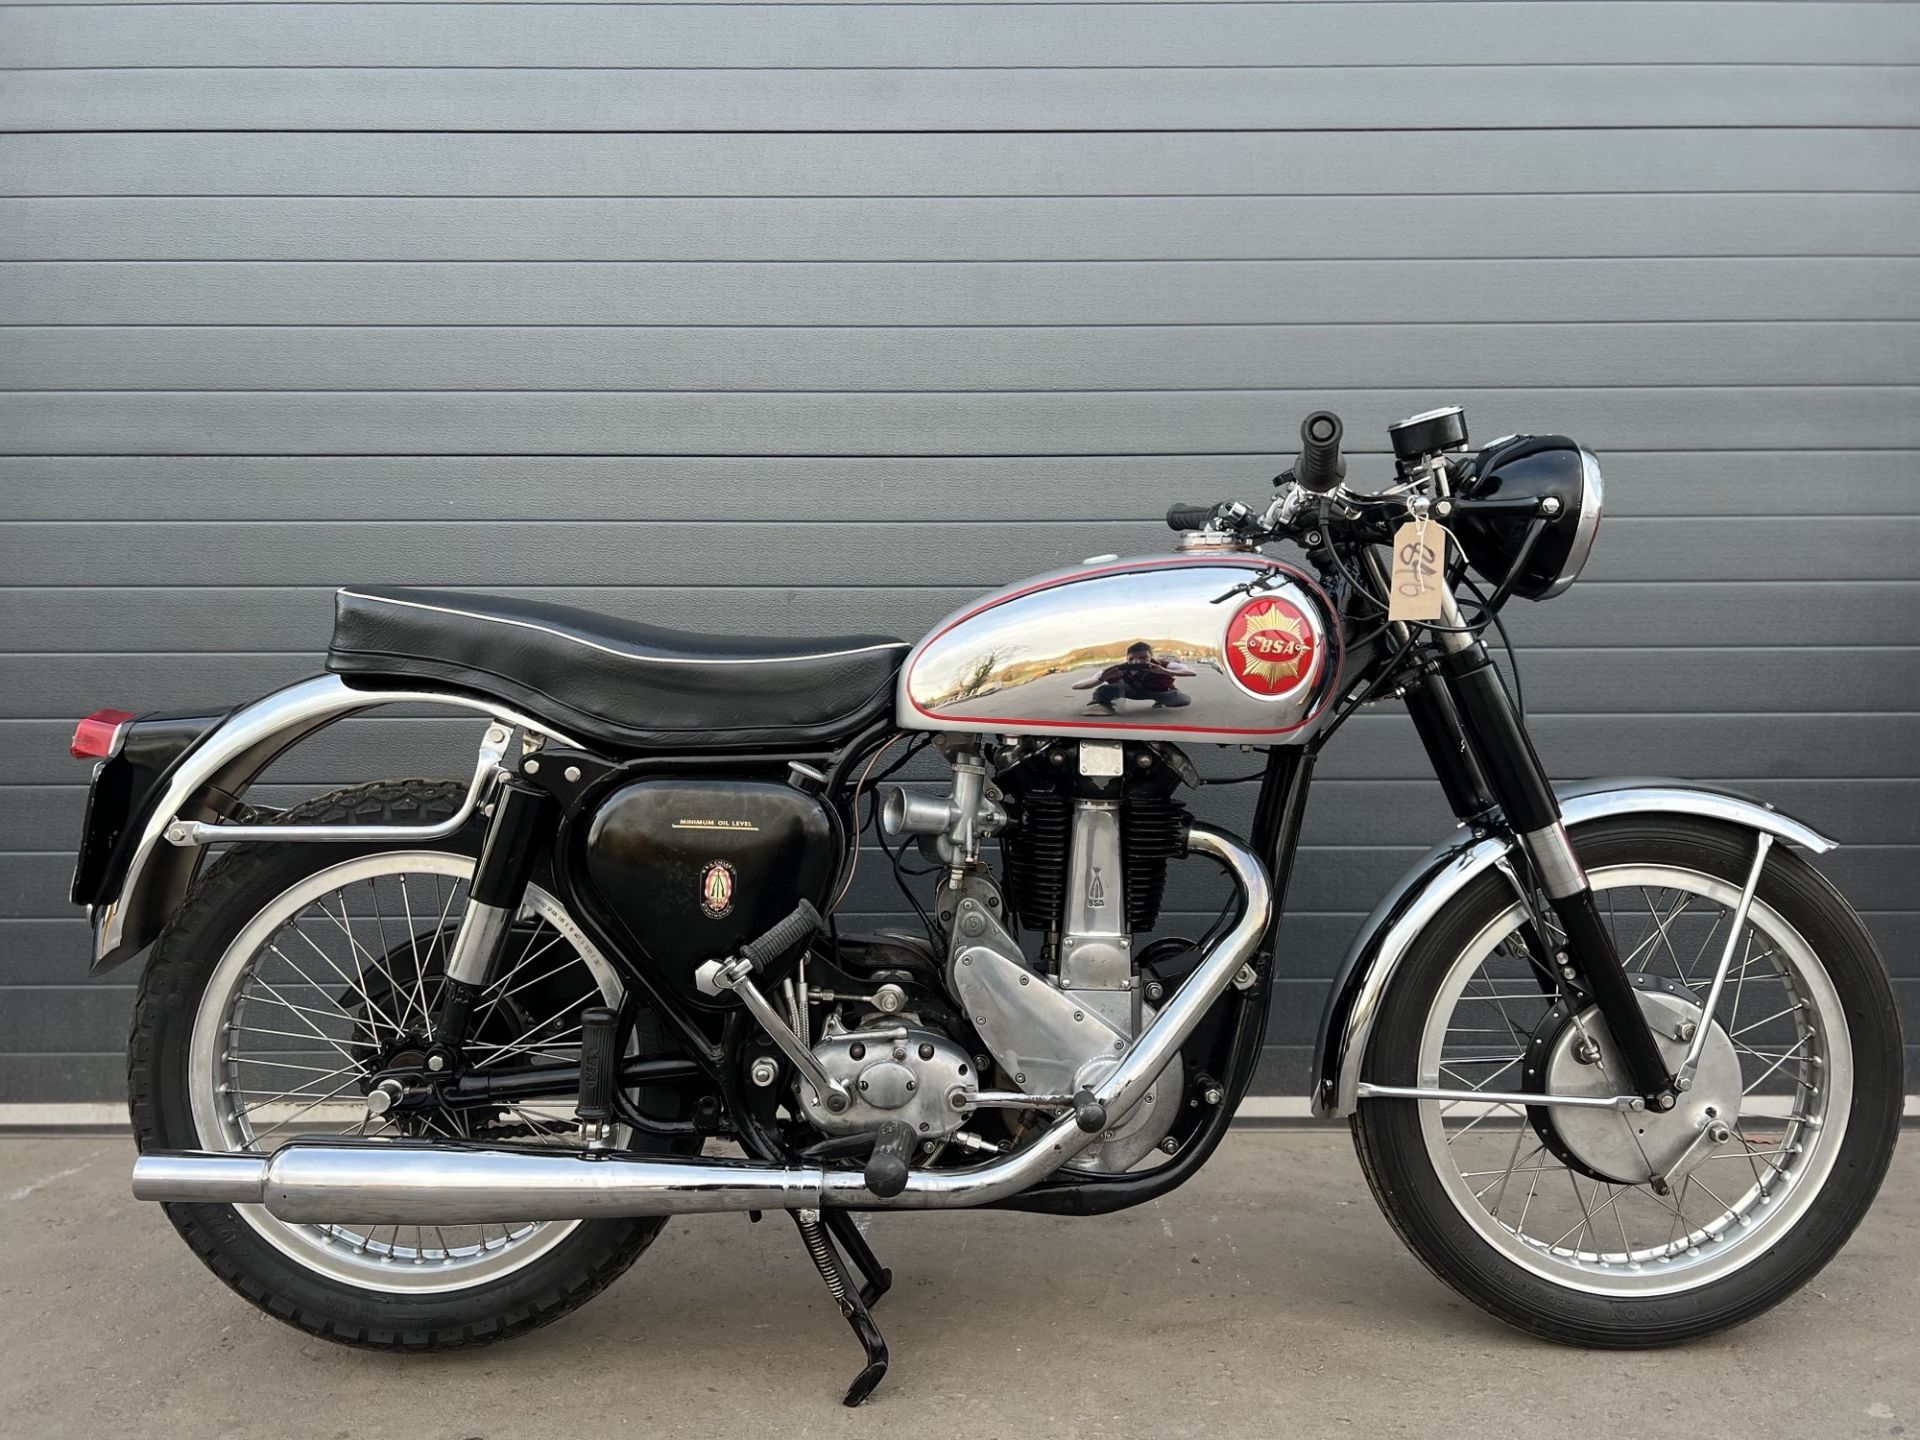 BSA B31 motorcycle. 1955. 350cc. Frame No. CB31 1167 Engine No. BB31 525 Alloy wheels with stainless